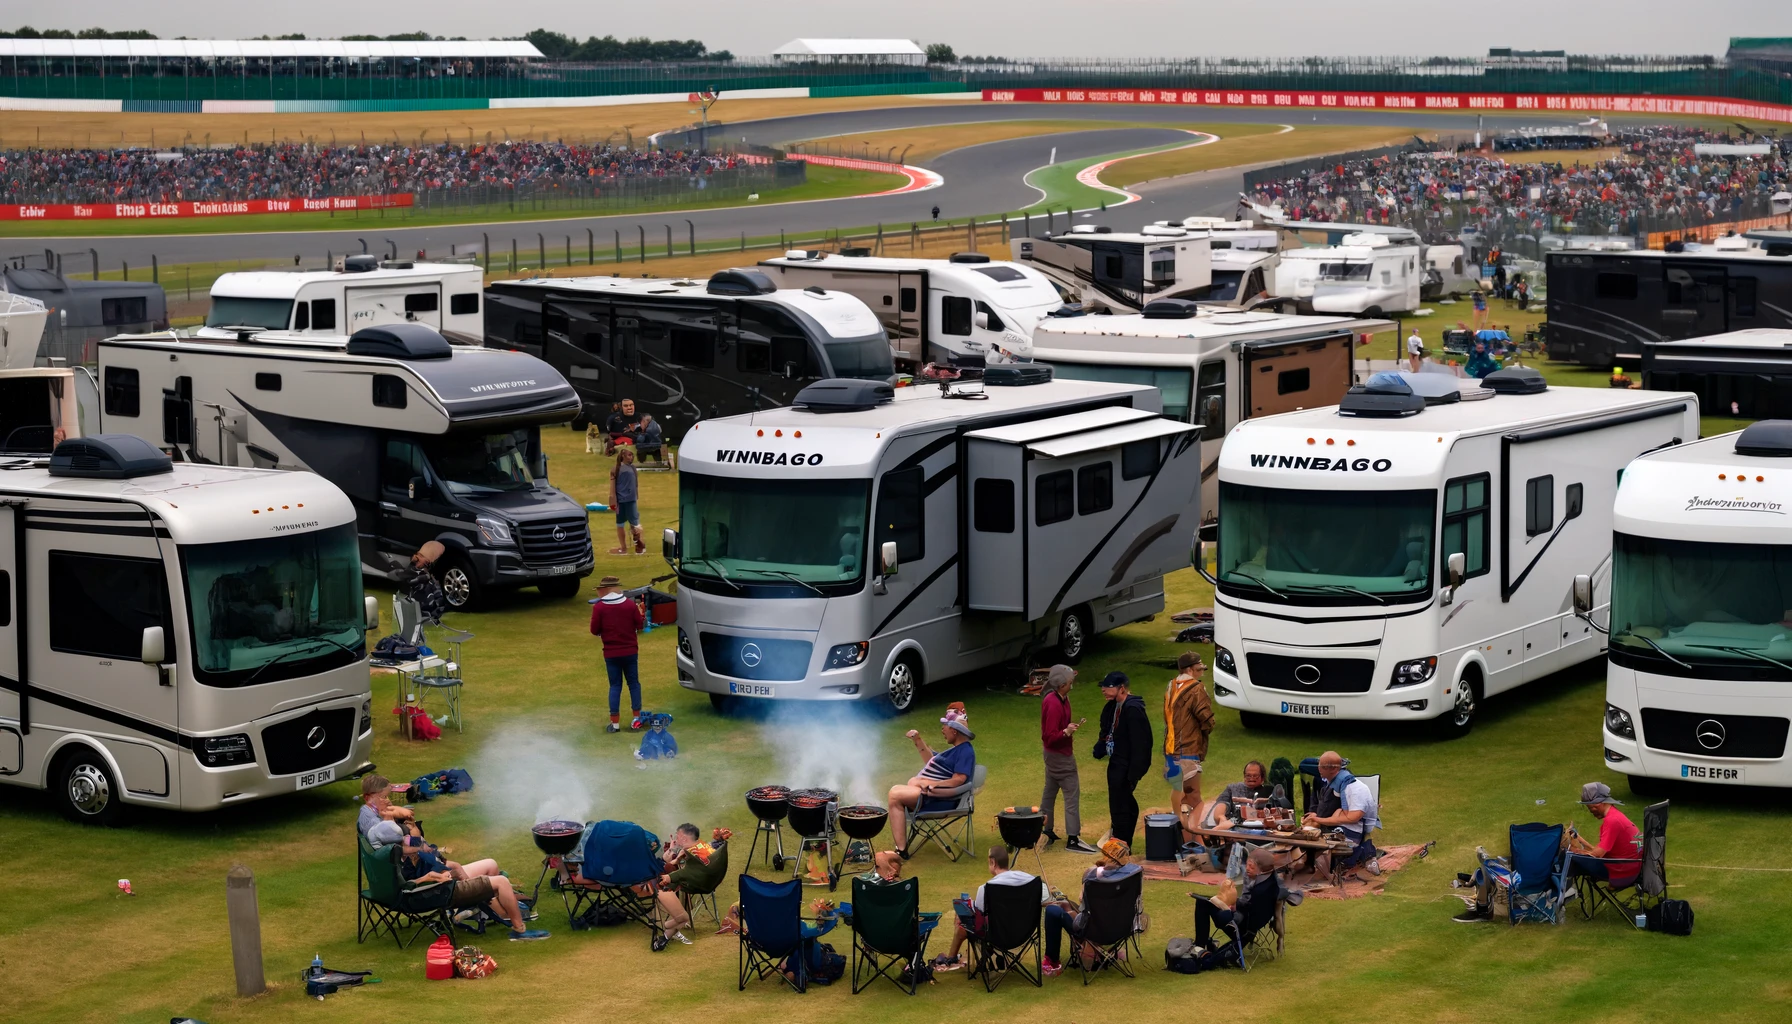 Motorhome hire at F1 Silverstone